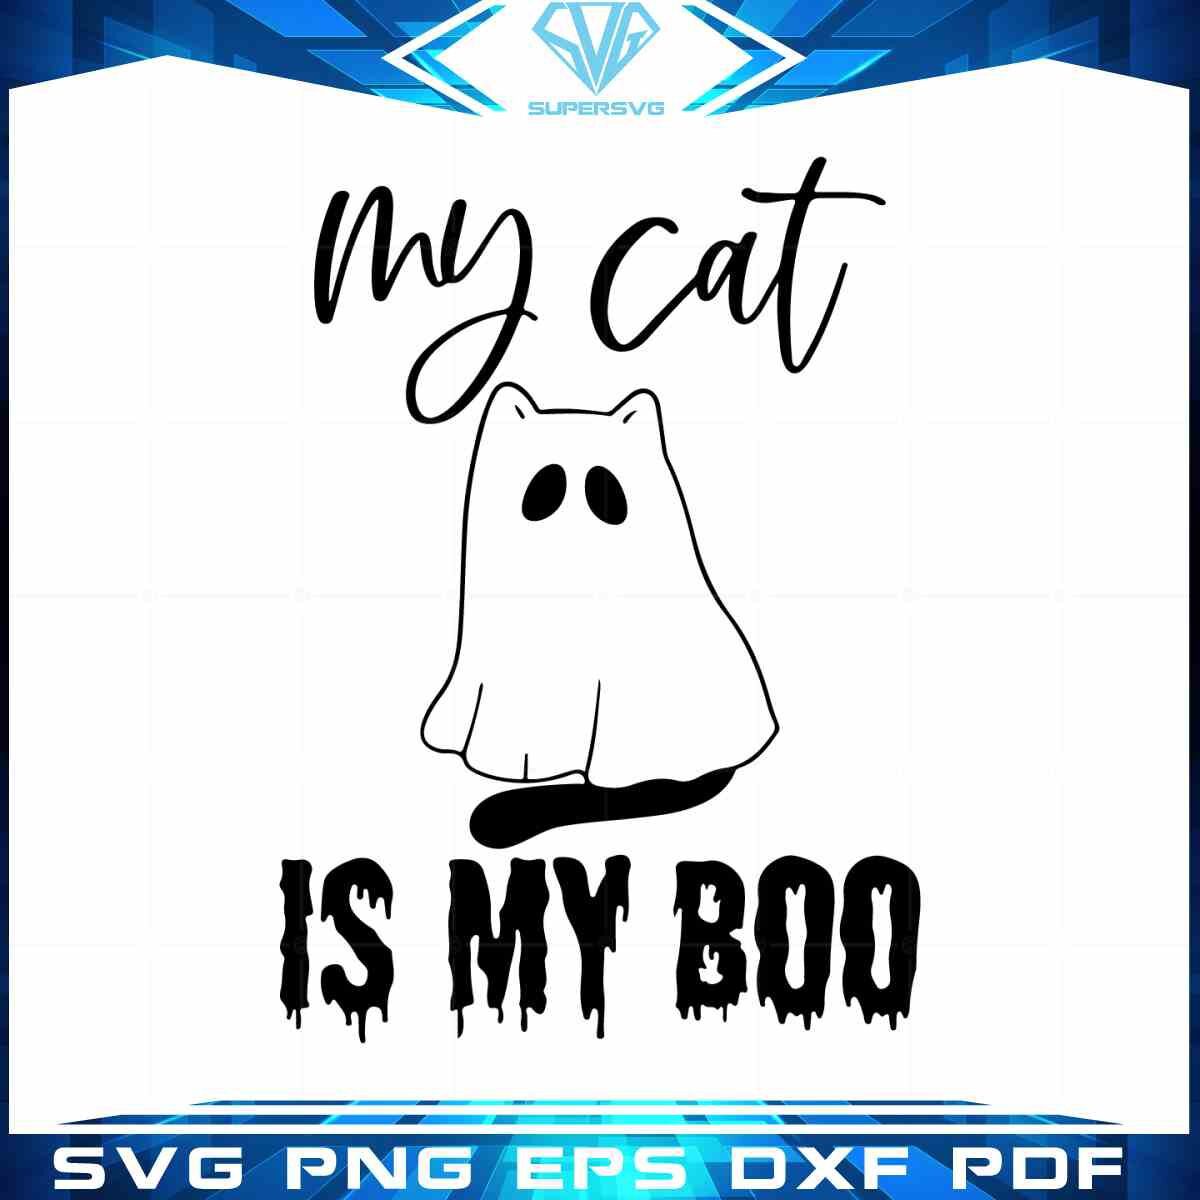 ghost-cat-quote-for-halloween-season-svg-files-silhouette-diy-craft